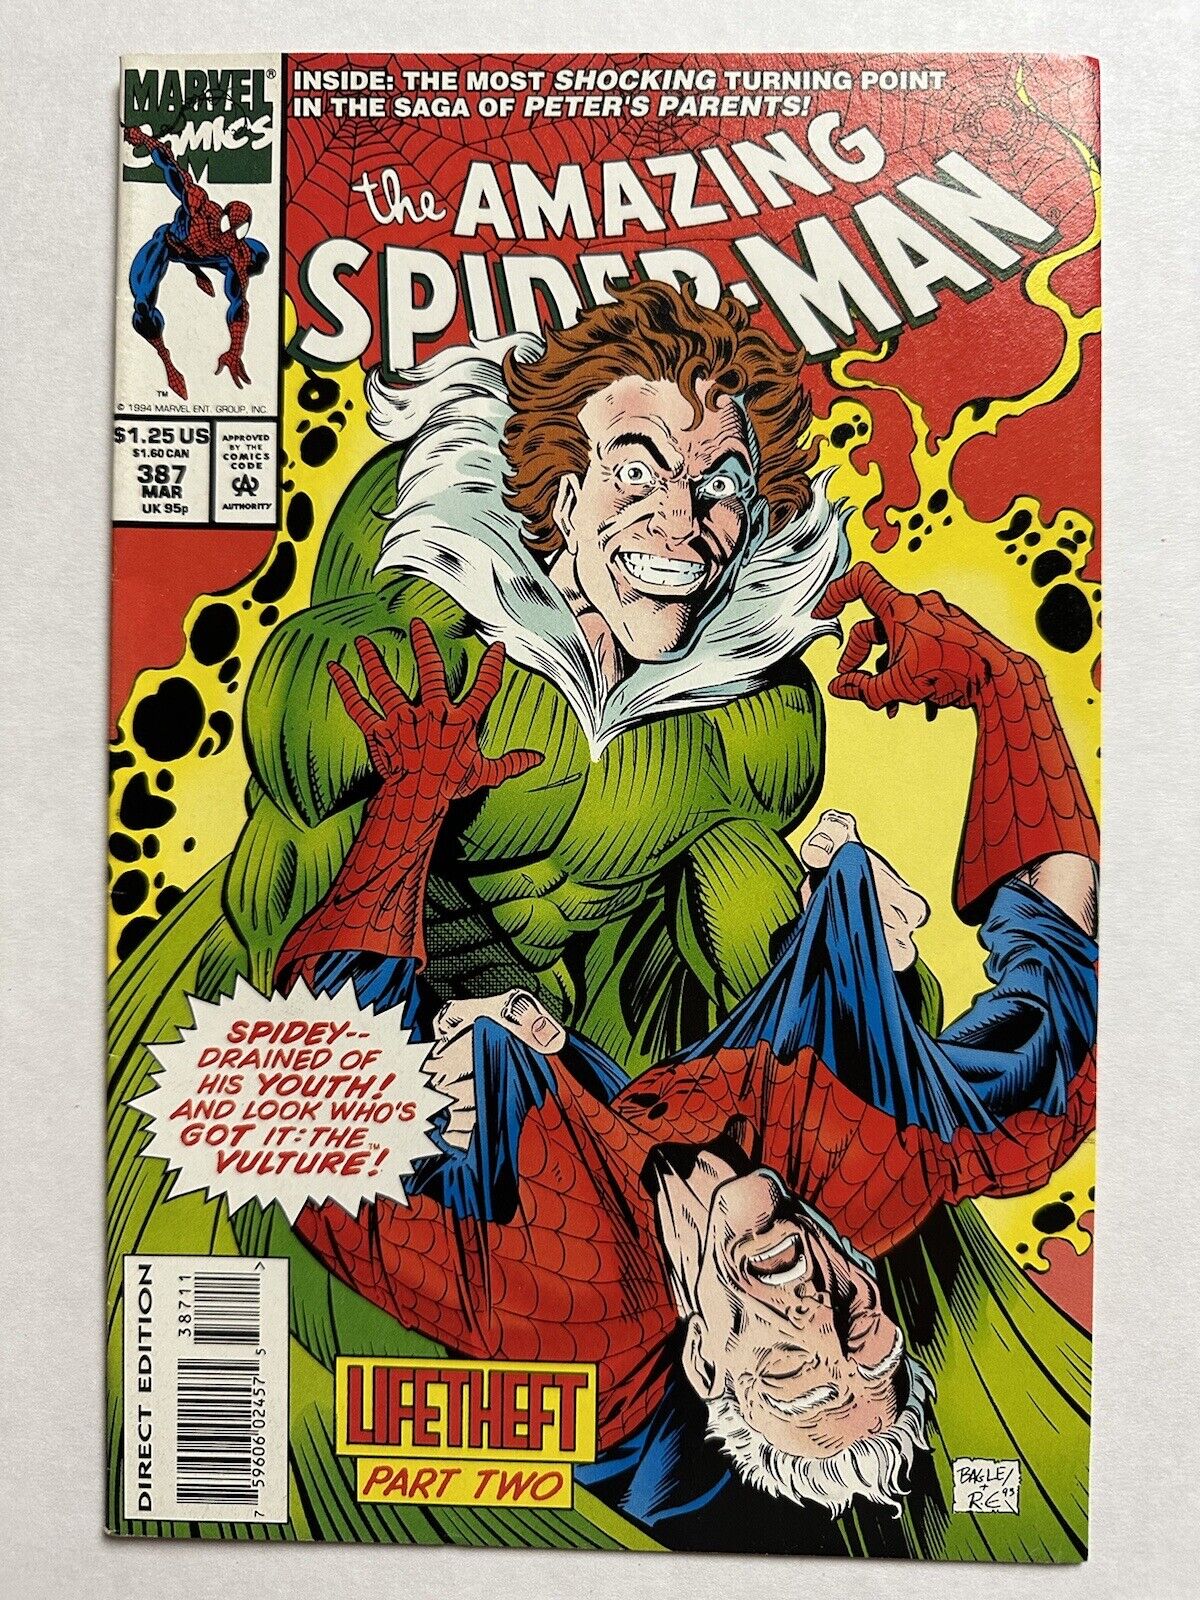 The Amazing Spider-Man #387 (Marvel Comics March 1994)